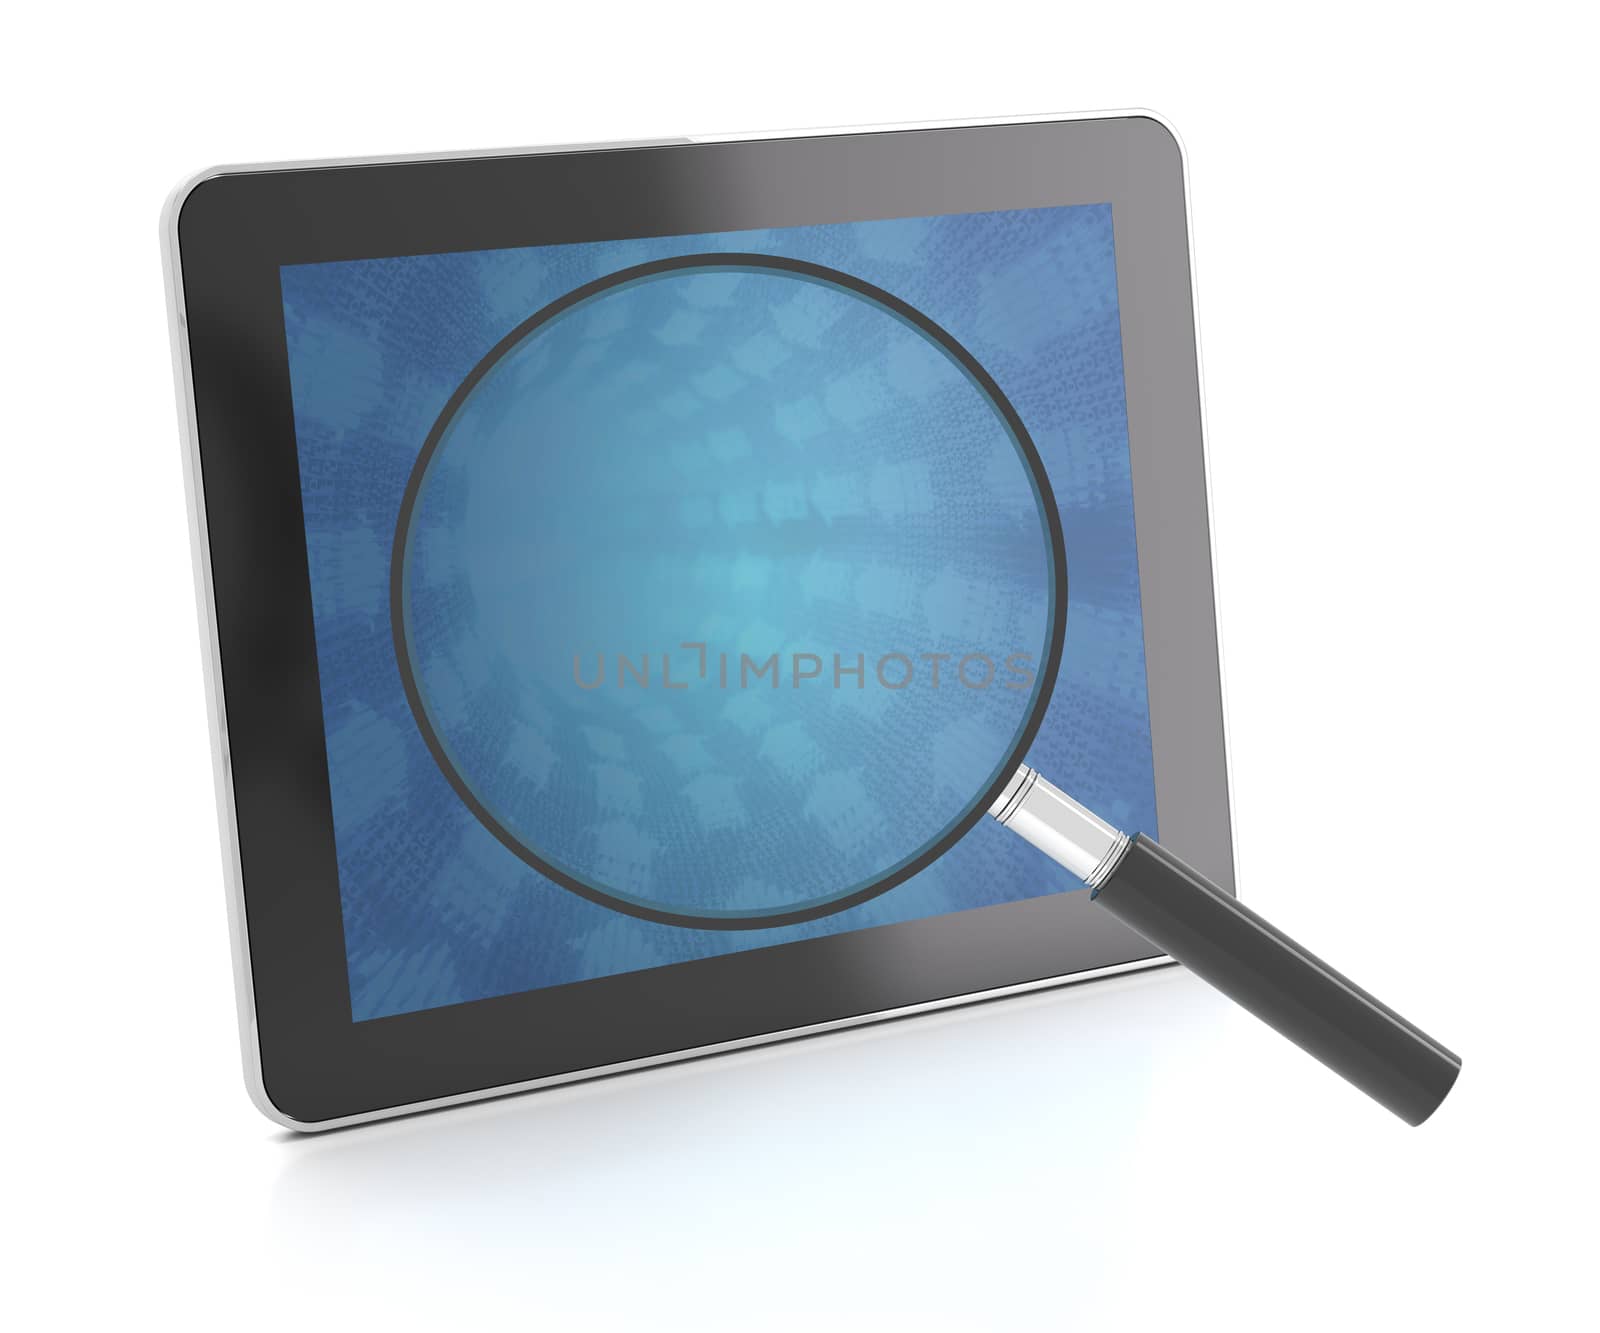 Digital tablet with magnifying glass, 3d render